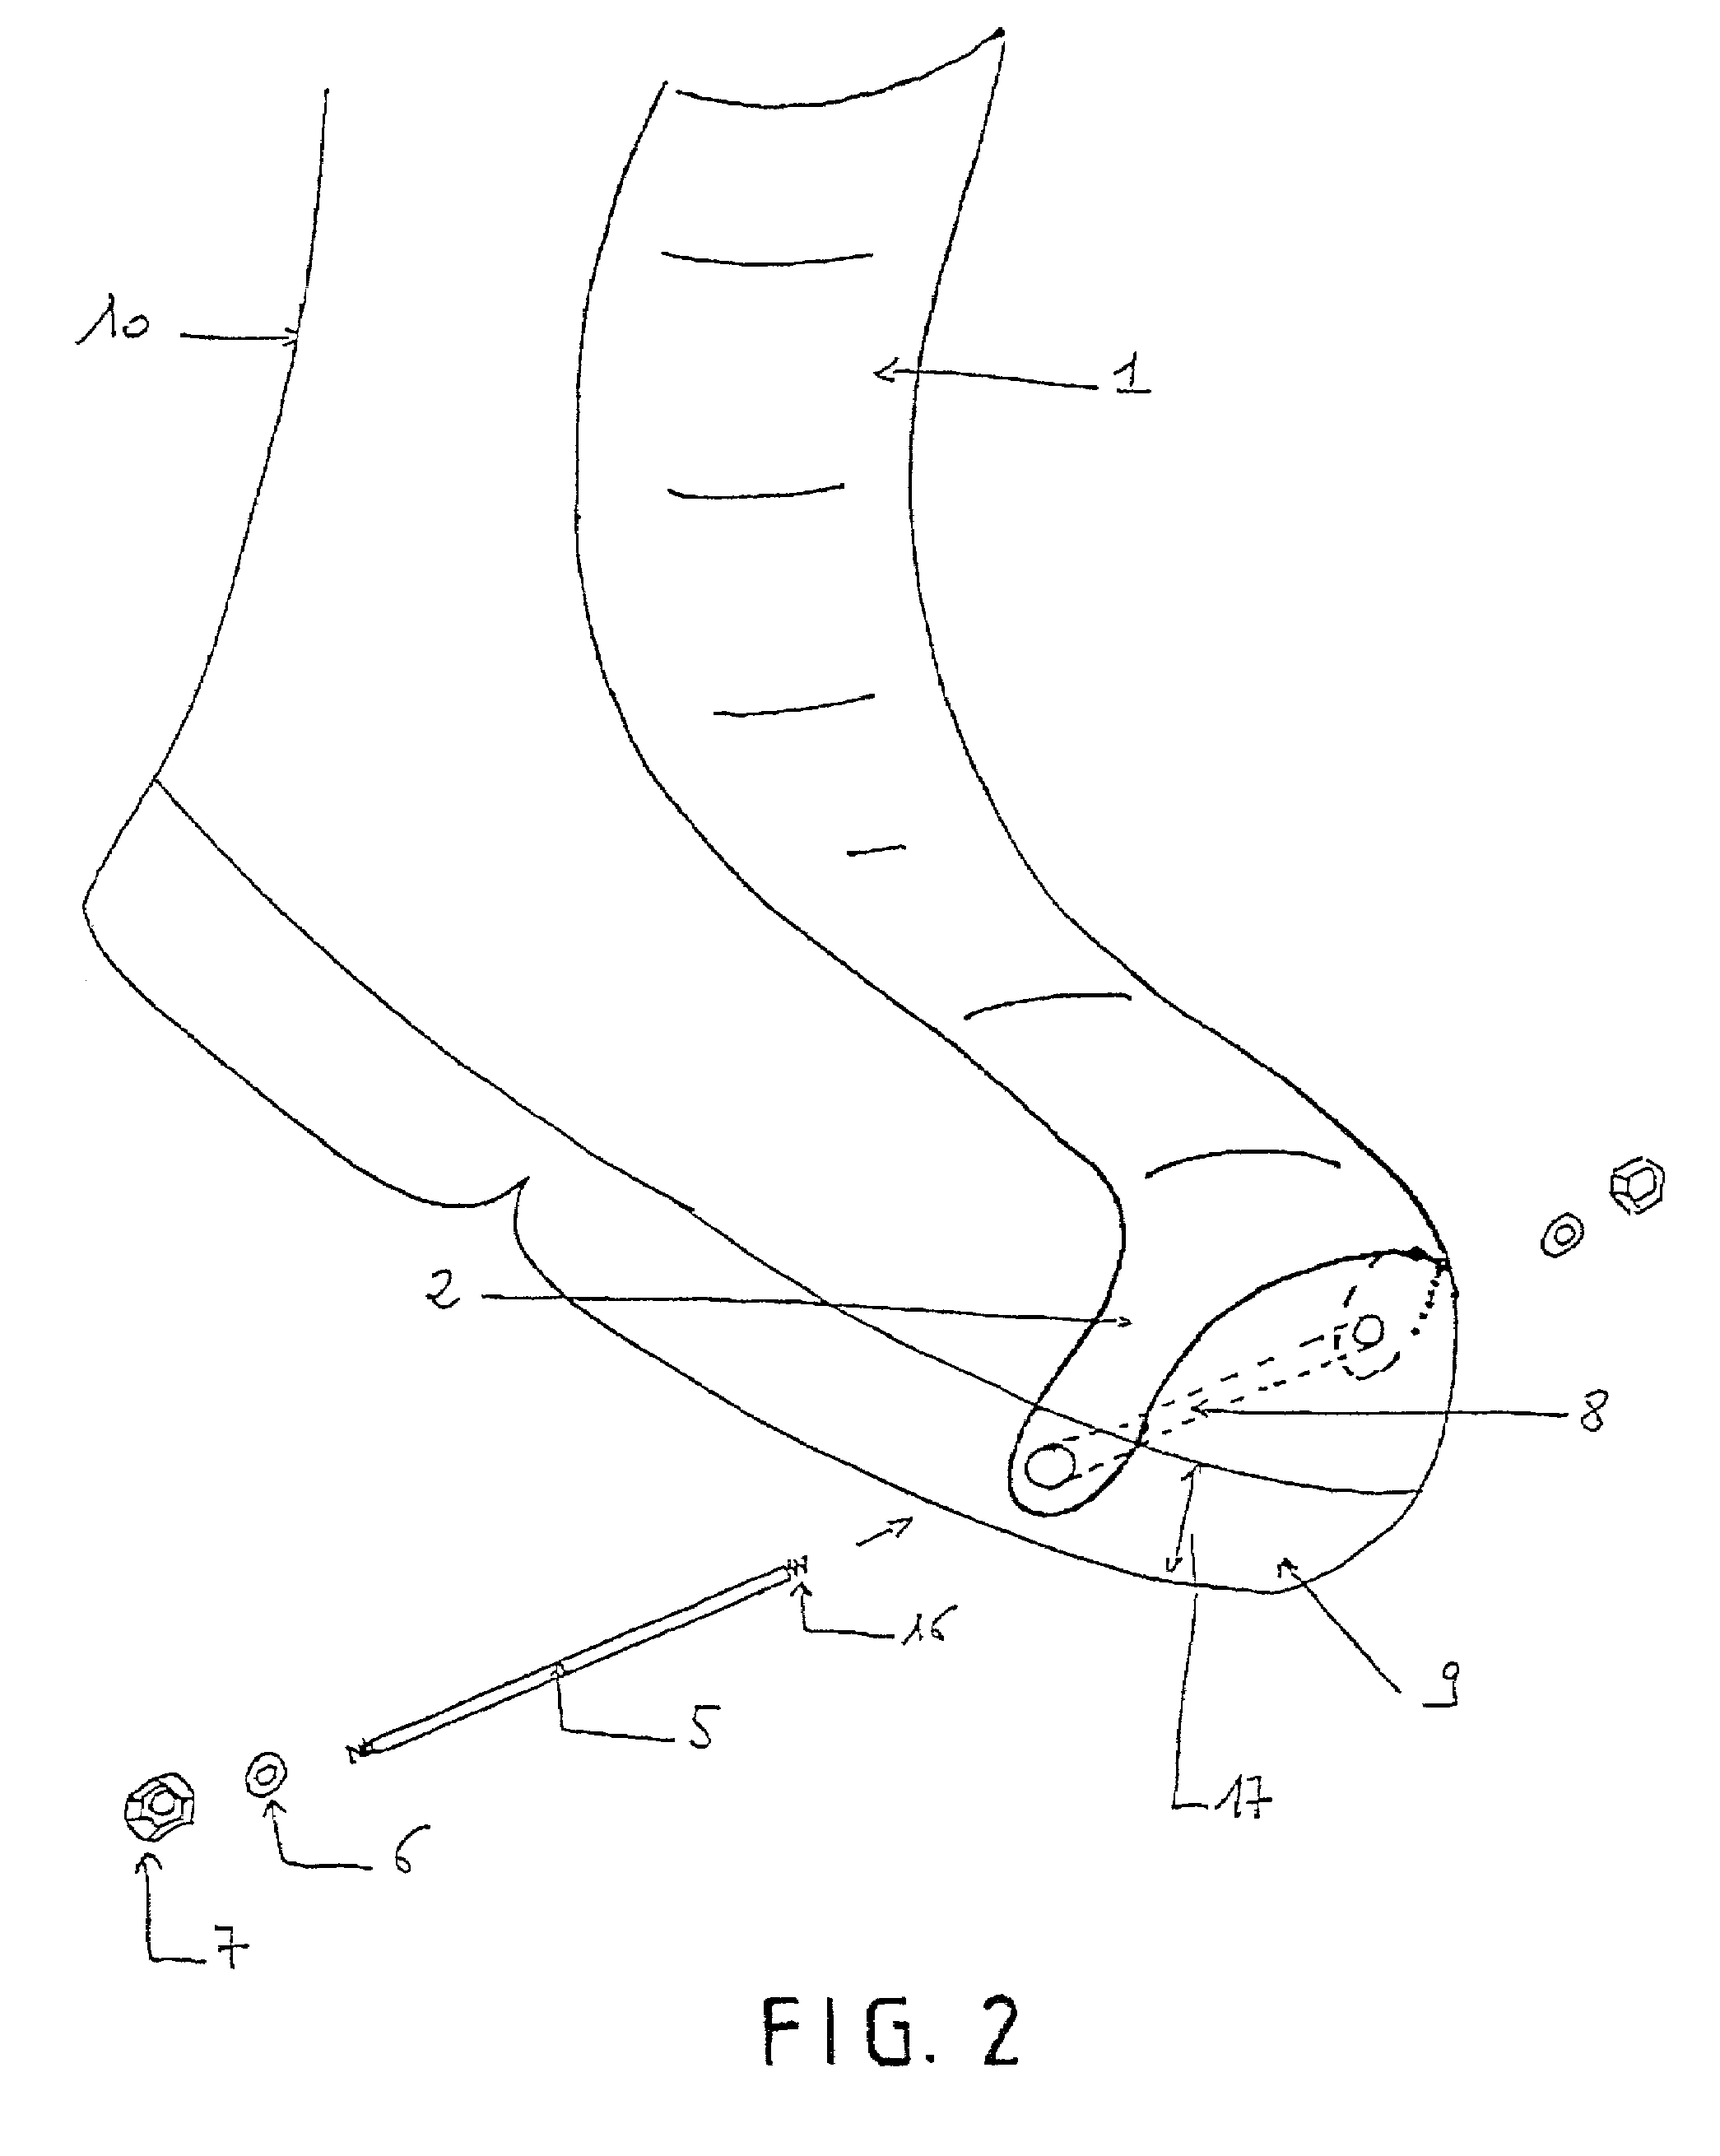 Movable cover for rigidifying and/ or protecting the front face of an article of footwear, such as a snowboard boot